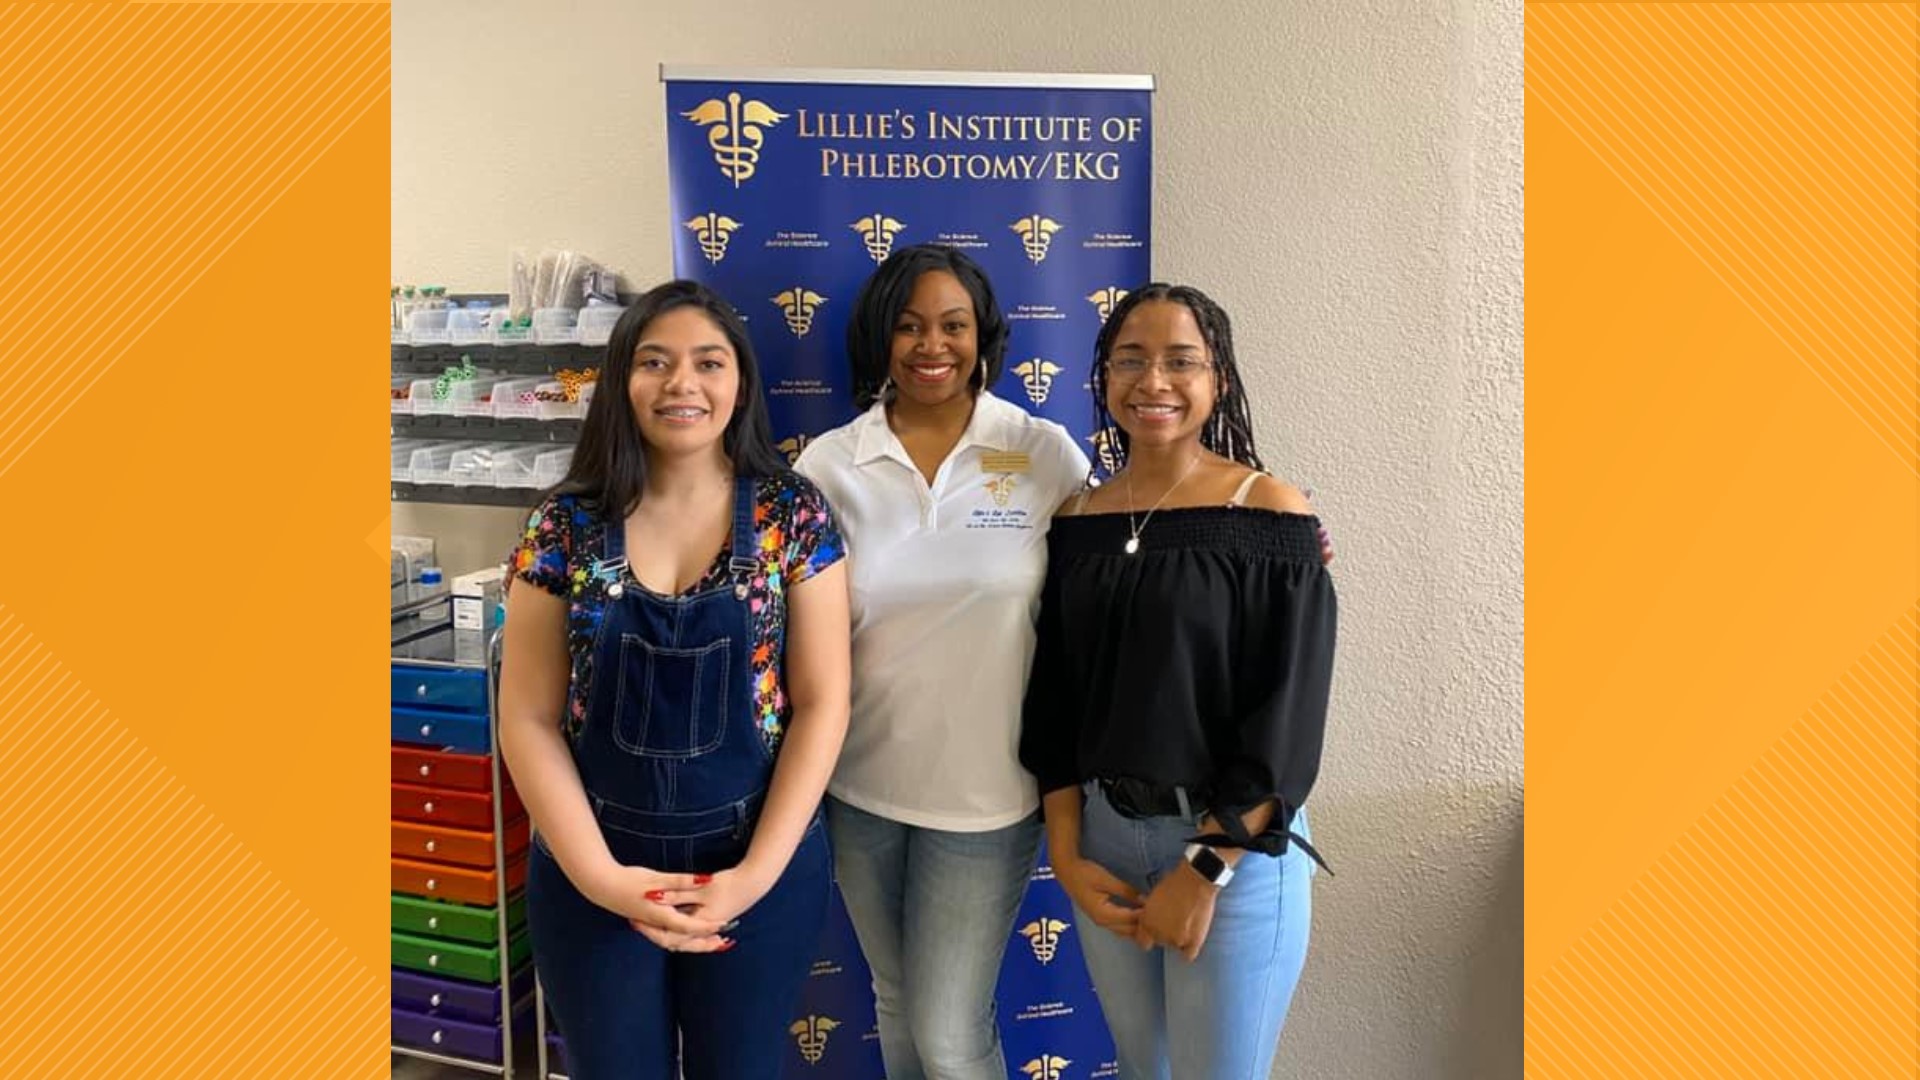 Brittney Johnson, the owner of  Lillie's Institute of Phlebotomy and EKG in Killeen, is helping high school seniors jumpstart their careers.